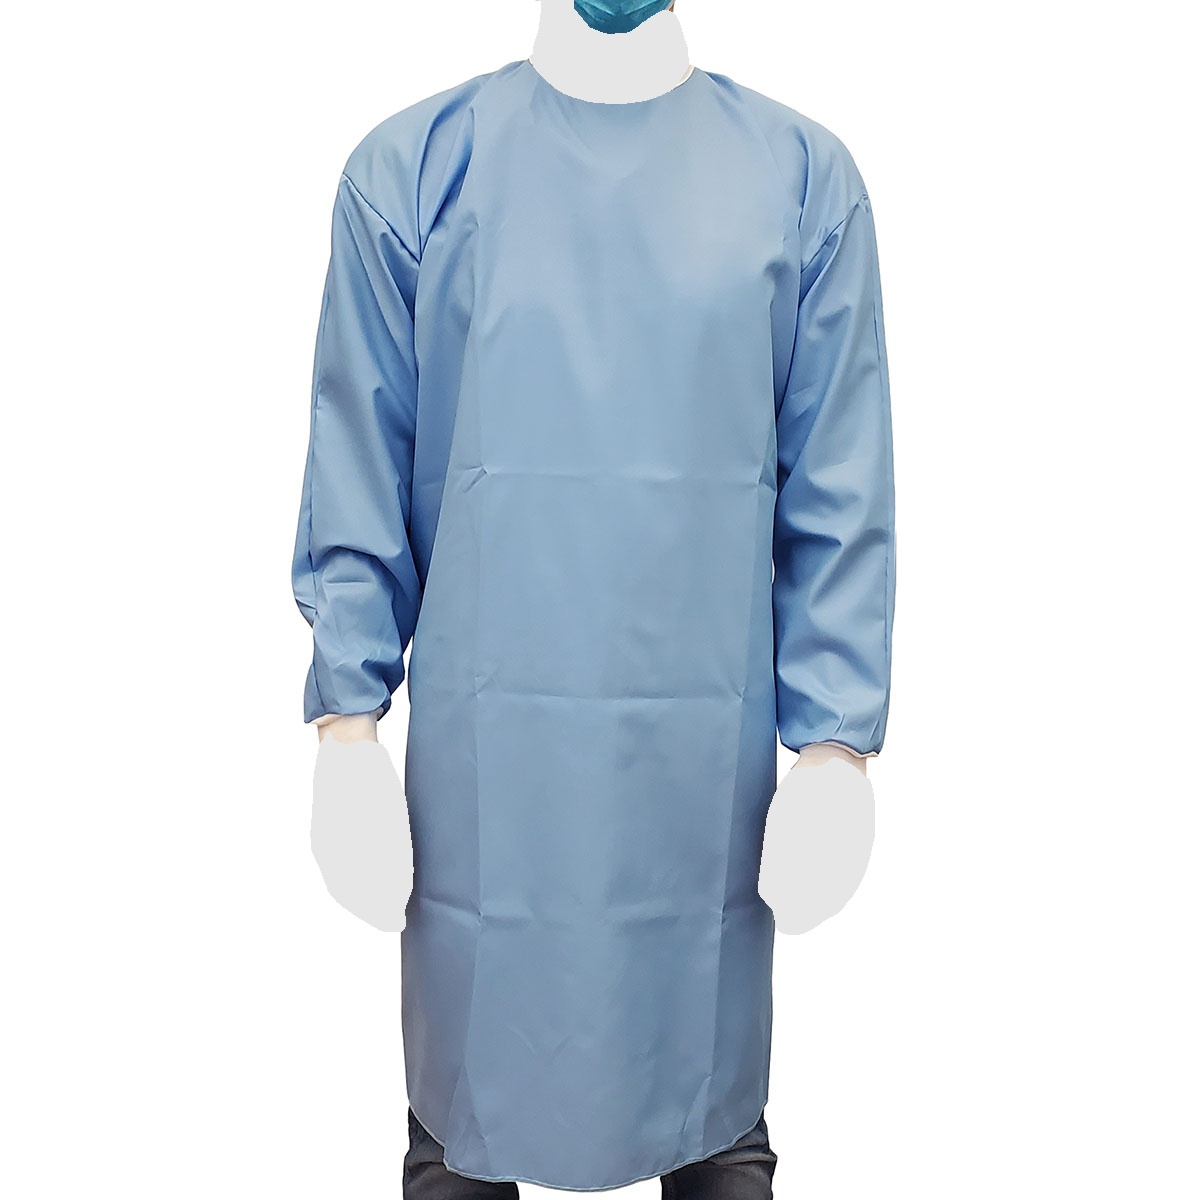 Non-Surgical Reusable Isolation Gown Level 2 LB-P